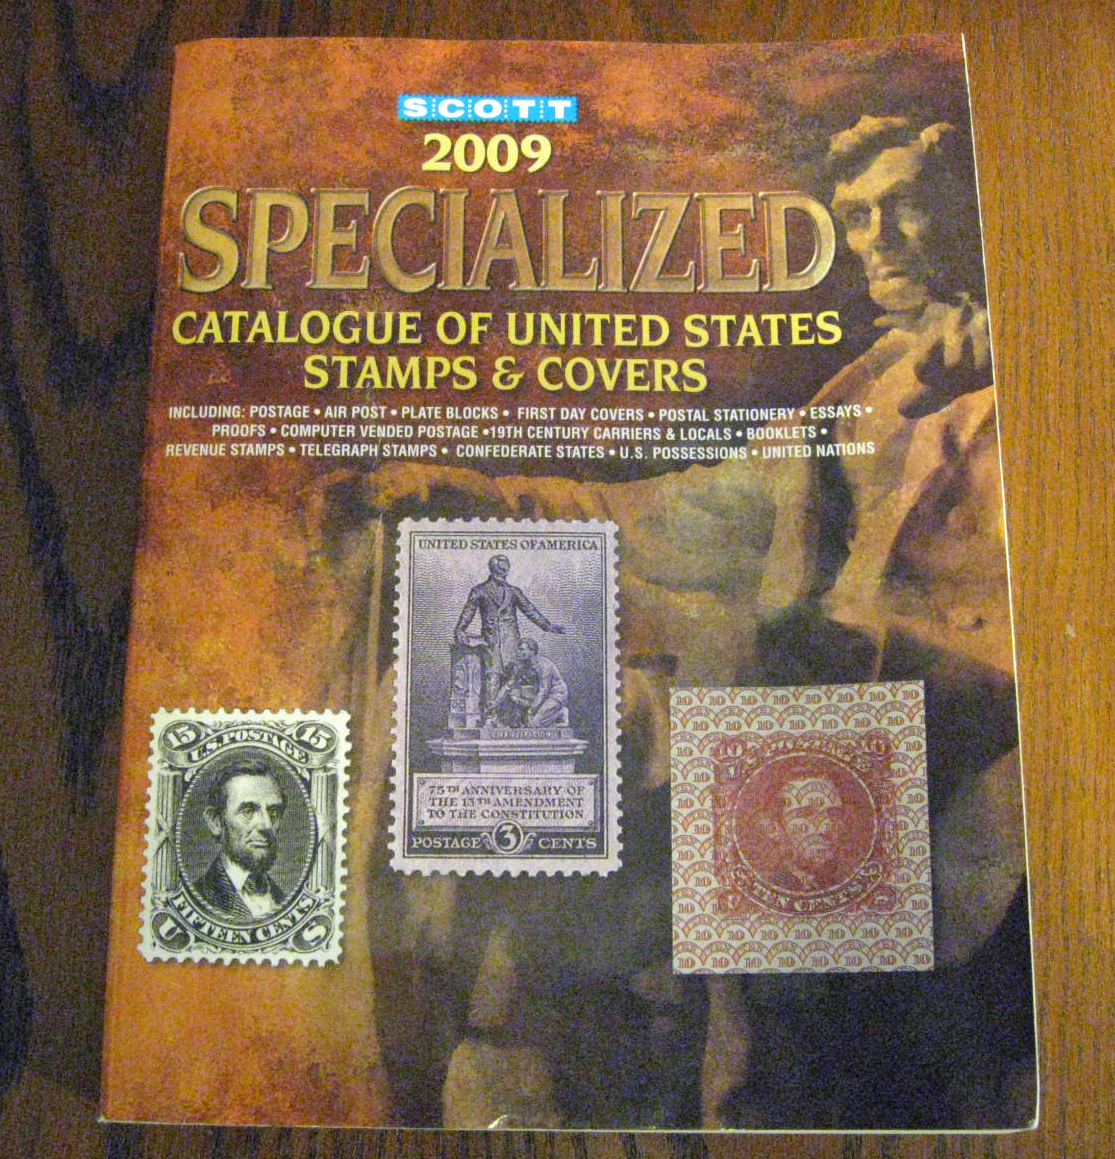 2009 Scott Specialized Catalogue of US Stamps & Covers - Click Image to Close